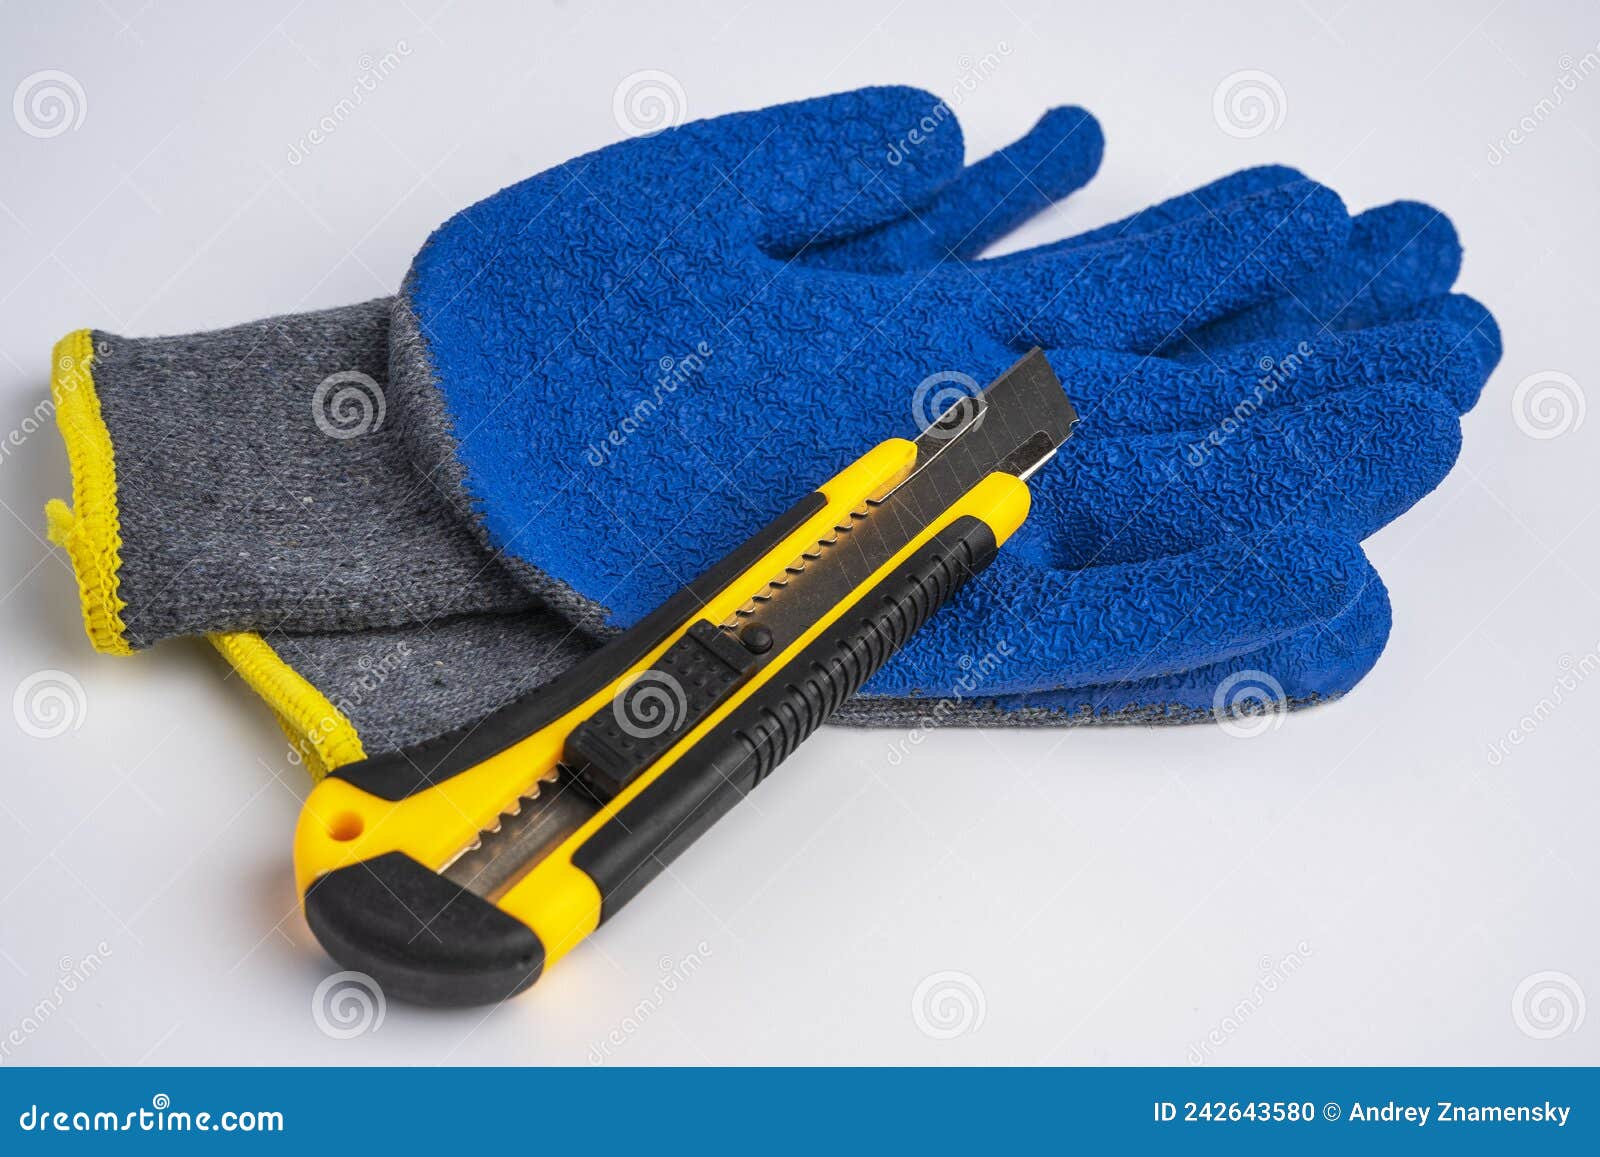 https://thumbs.dreamstime.com/z/blue-rubberized-work-gloves-stationery-knife-lie-white-background-construction-repair-health-protection-blue-242643580.jpg